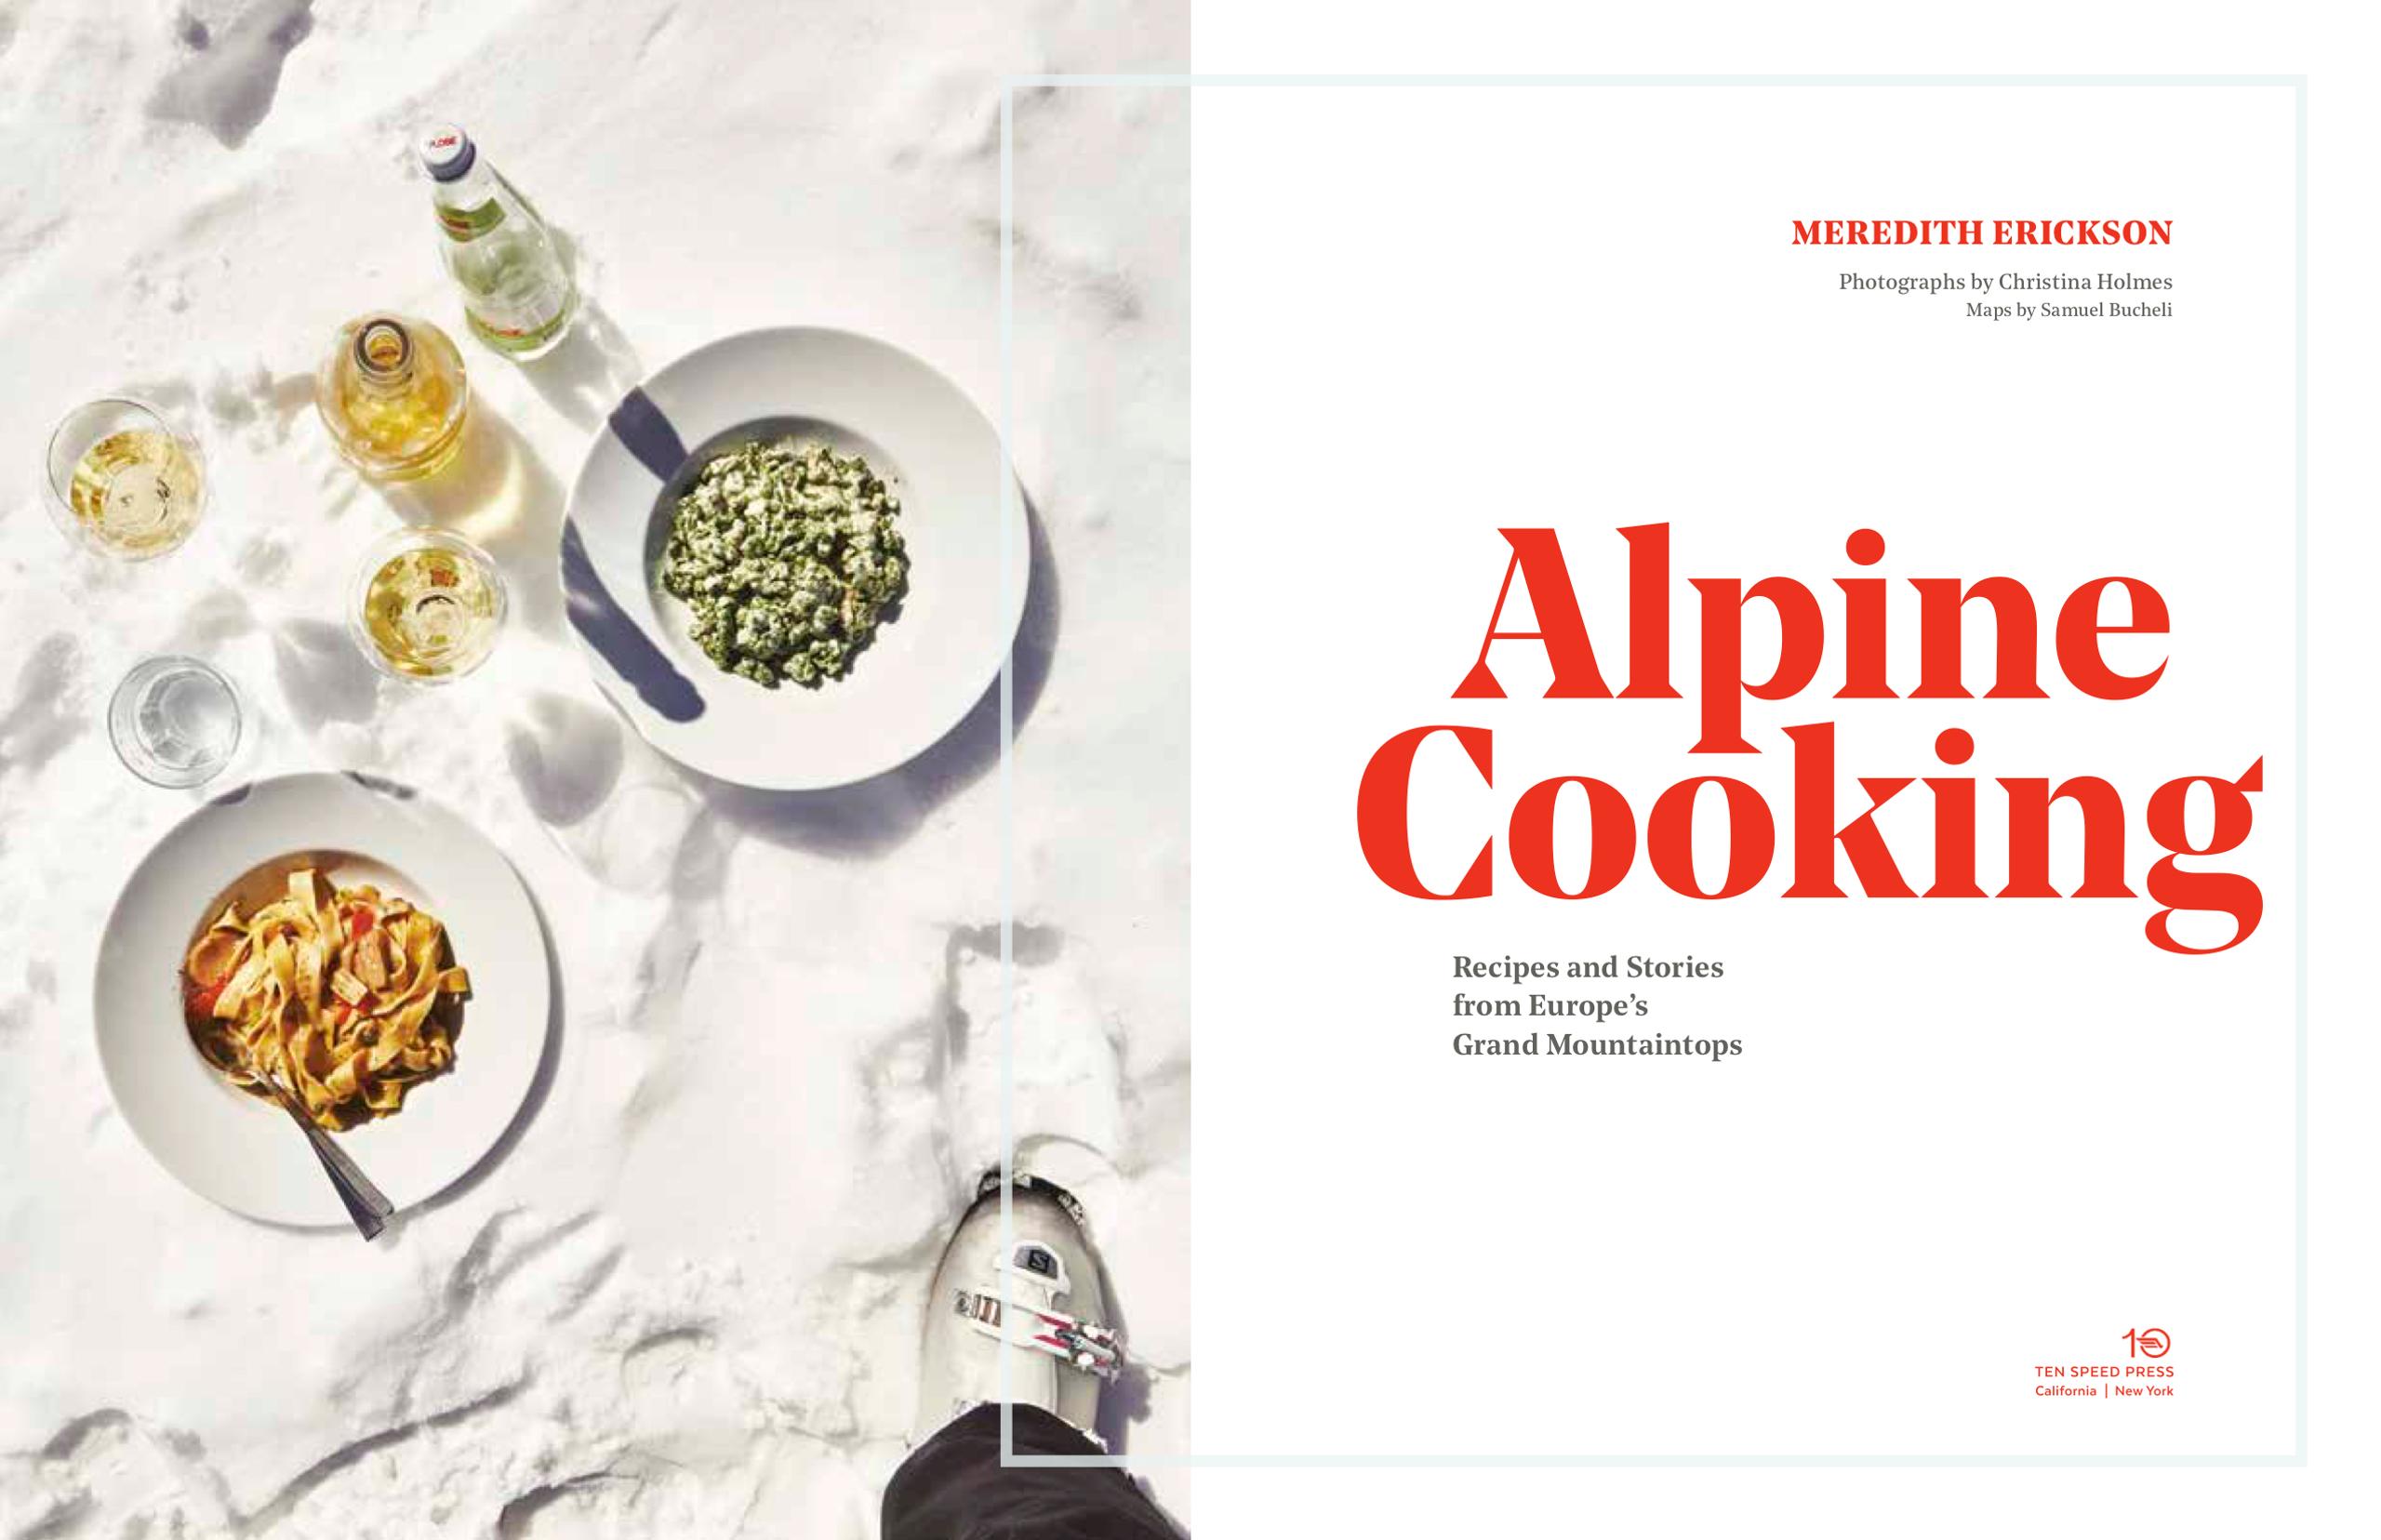 cookbook cover displaying food and drinks and title "Alpine Cooking"